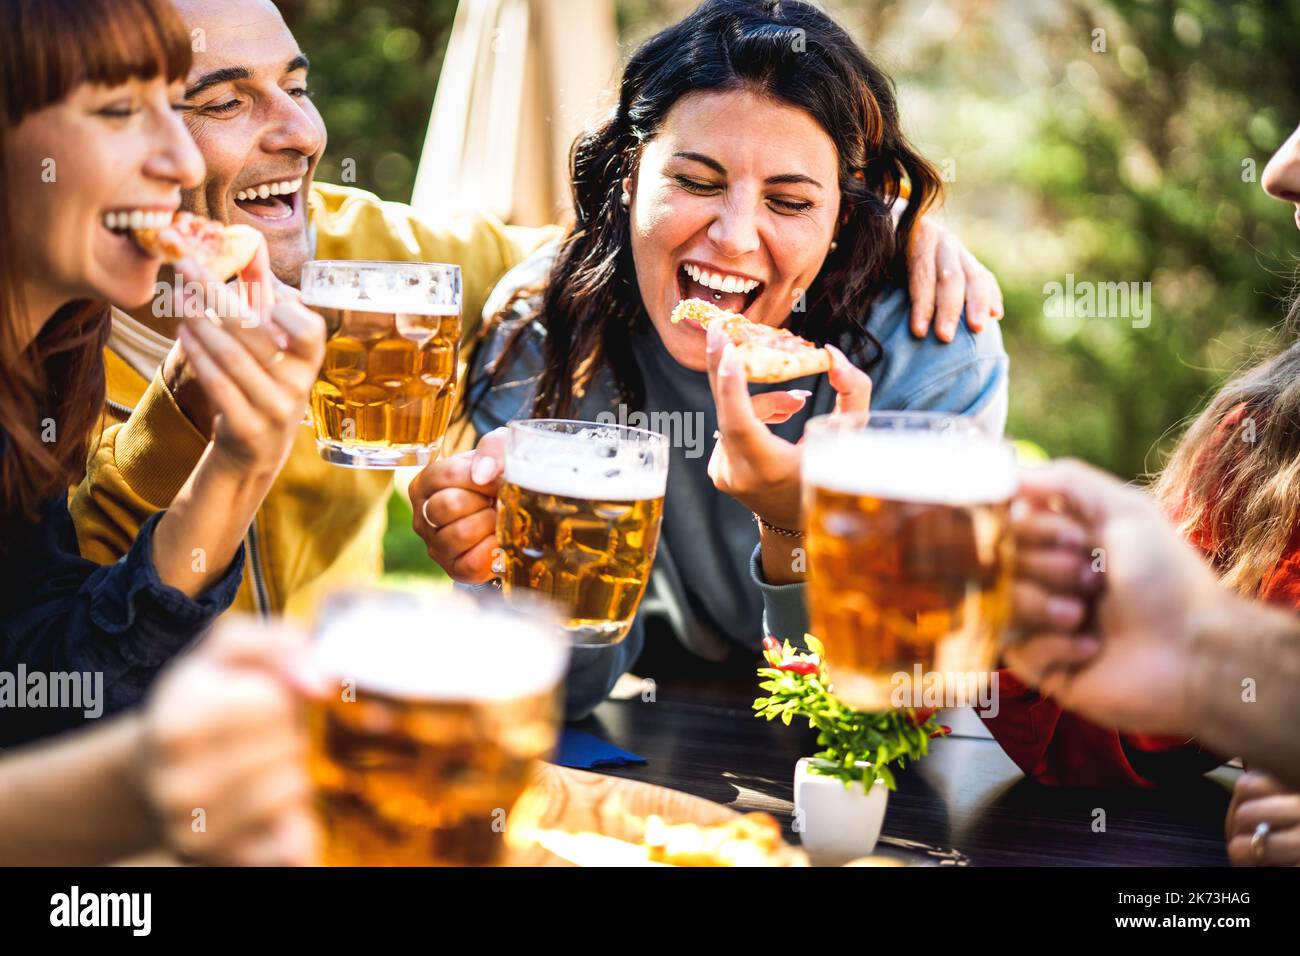 Happy friends eating pizza at beer garden - Beverage life style concept with young people enjoying time drinking together and having fun at brewery Stock Photo